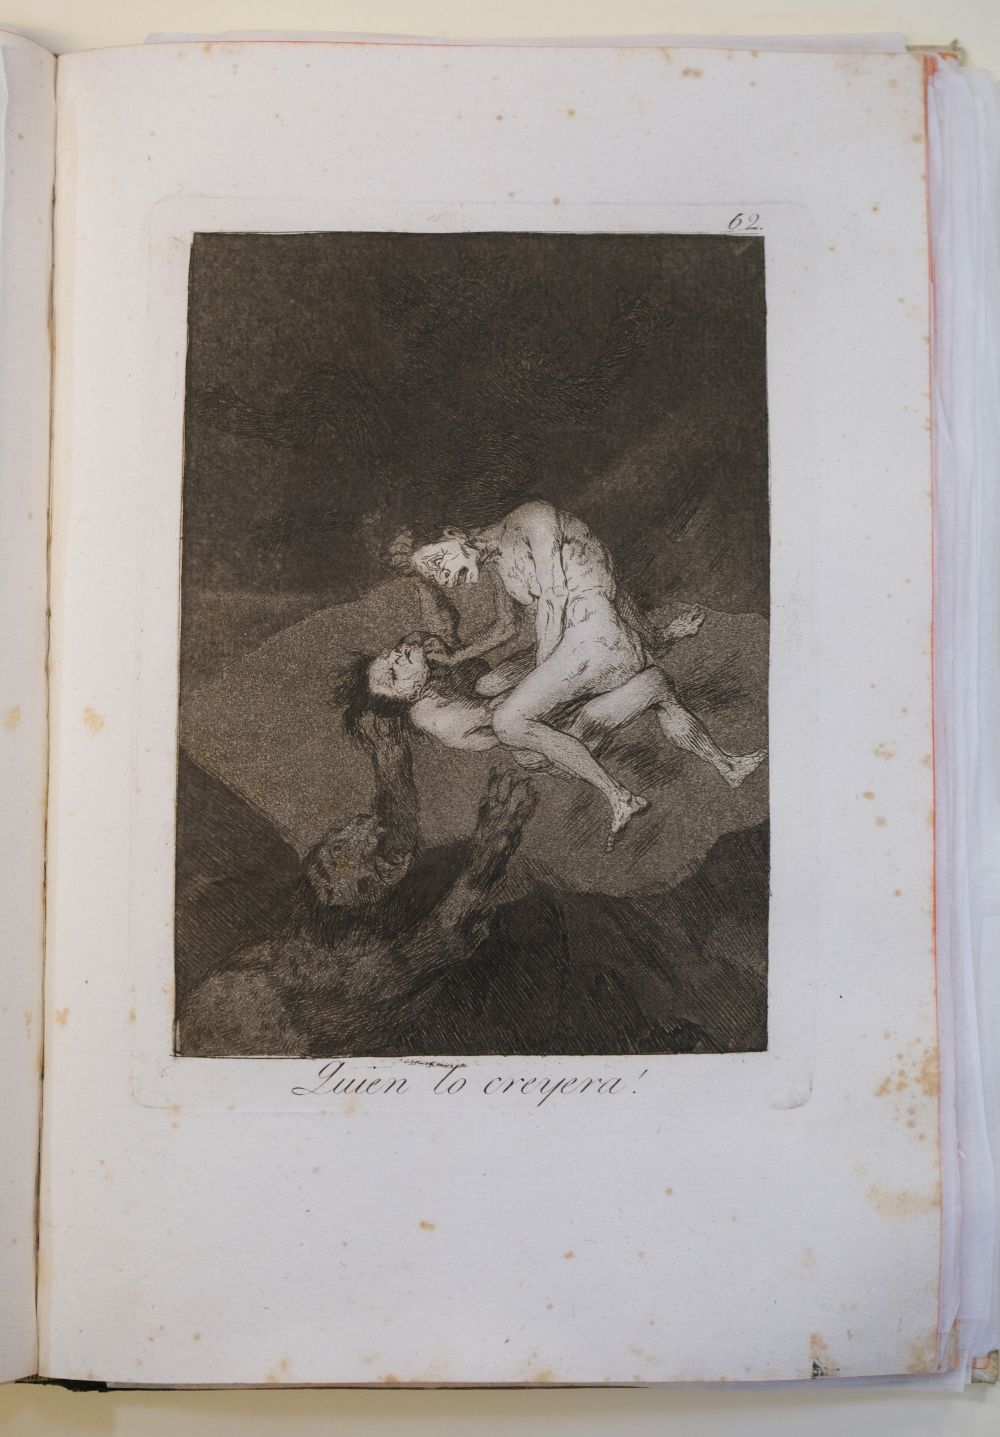 Goya (Francisco de, 1746-1828) Los Caprichos, 1799, the complete set of 80 etchings, FIRST EDITION - Image 29 of 37